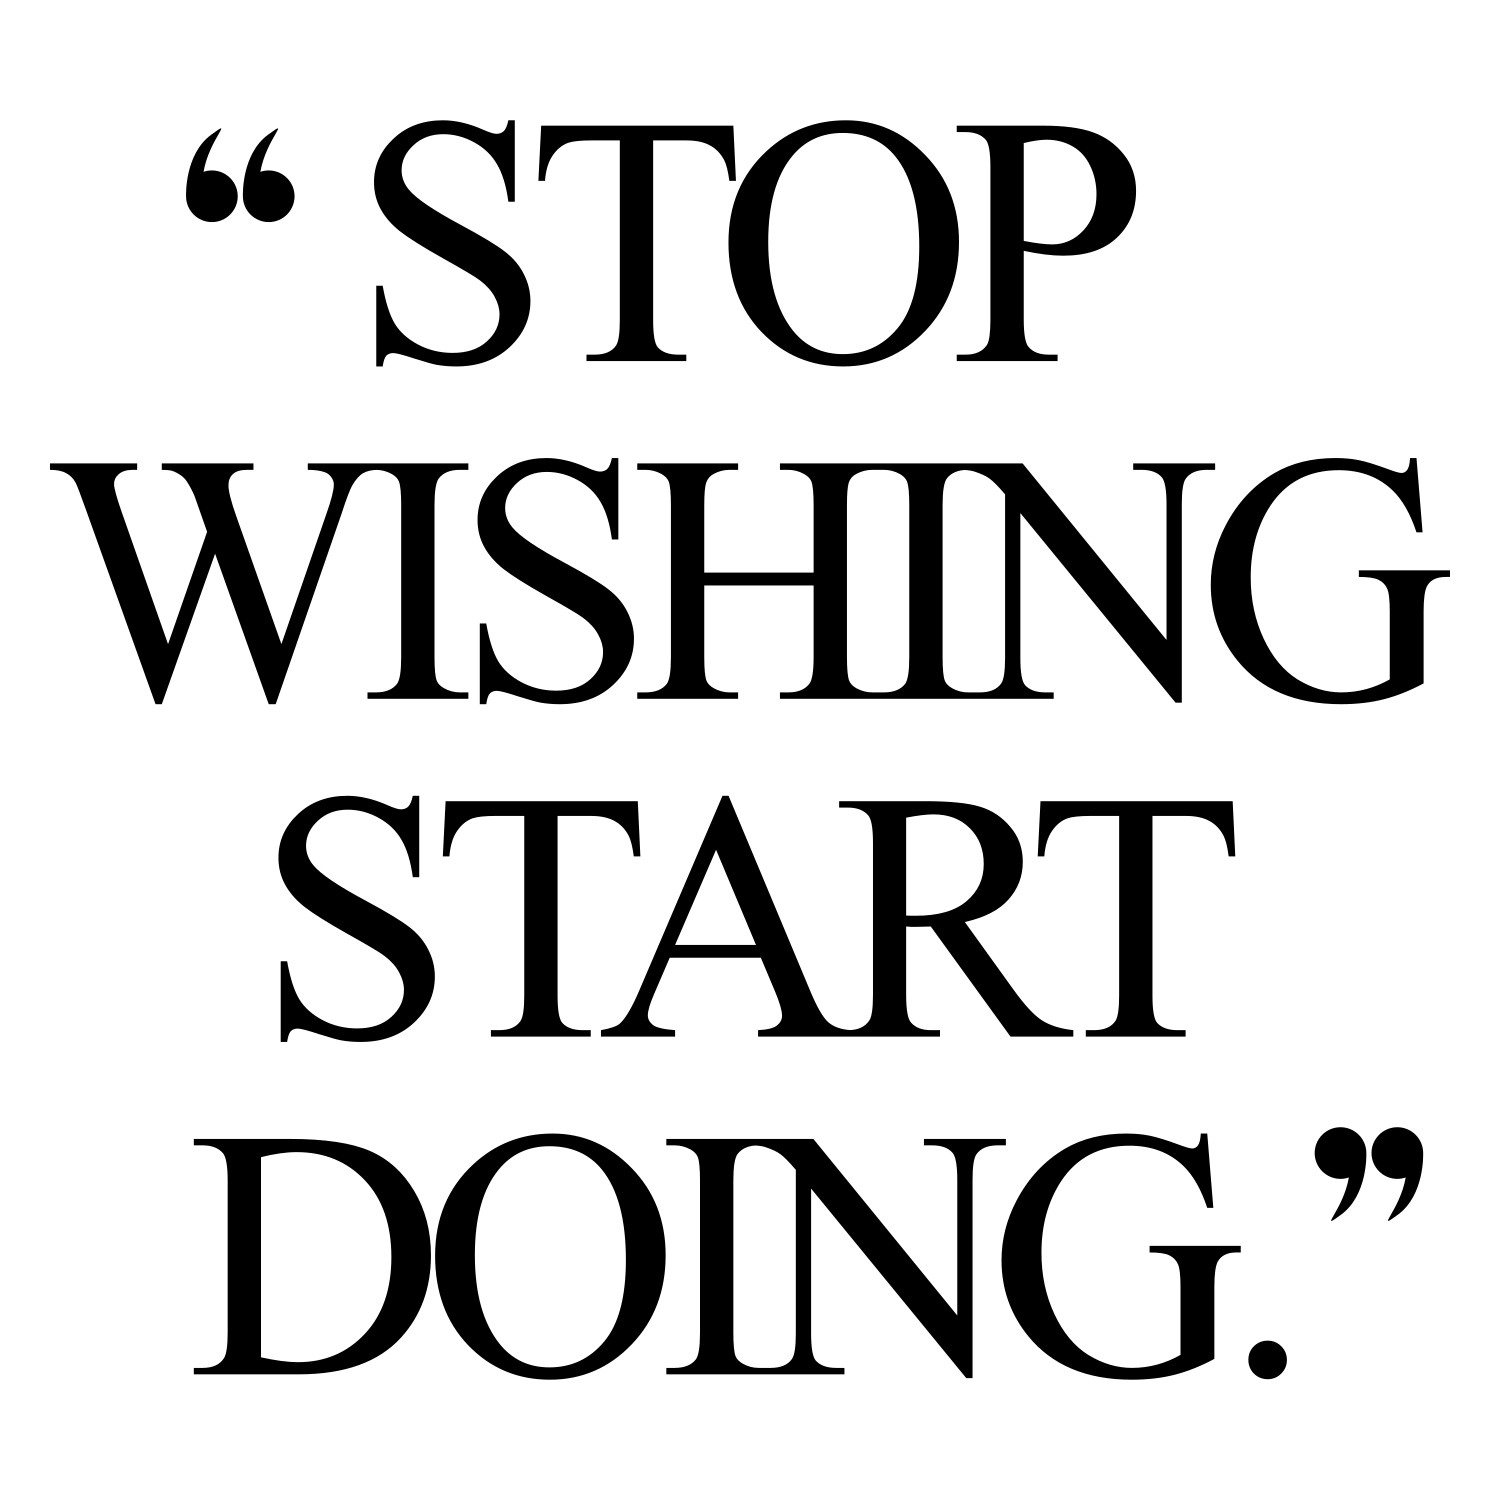 Stop wishing start doing! Browse our collection of inspirational weight loss quotes and get instant exercise and training motivation. Transform positive thoughts into positive actions and get fit, healthy and happy! https://www.spotebi.com/workout-motivation/stop-wishing-start-doing-inspirational-weight-loss-quote/